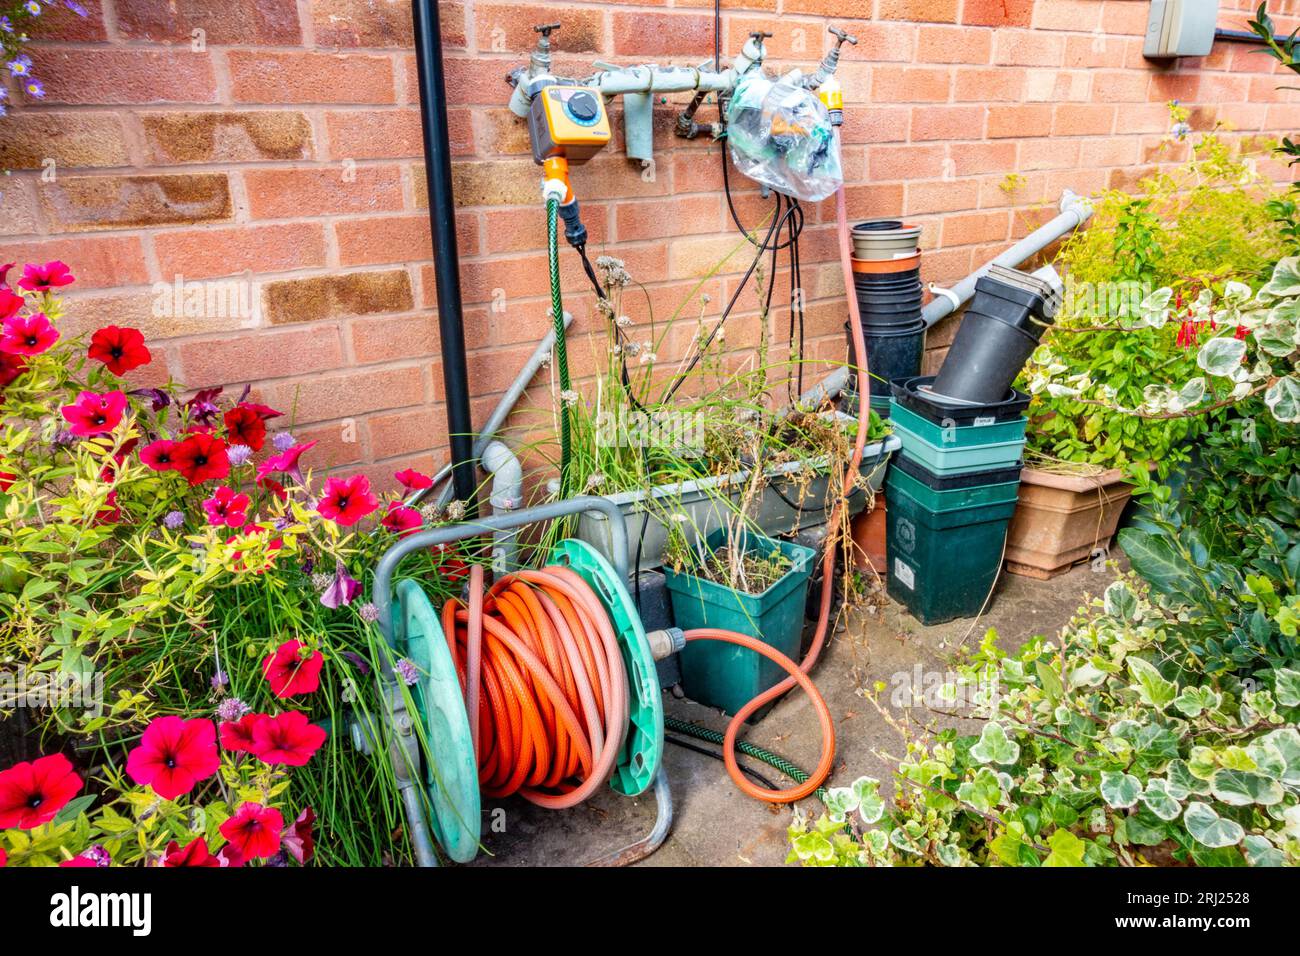 A hosepipe connected to a garden tap via a water computer Stock Photo